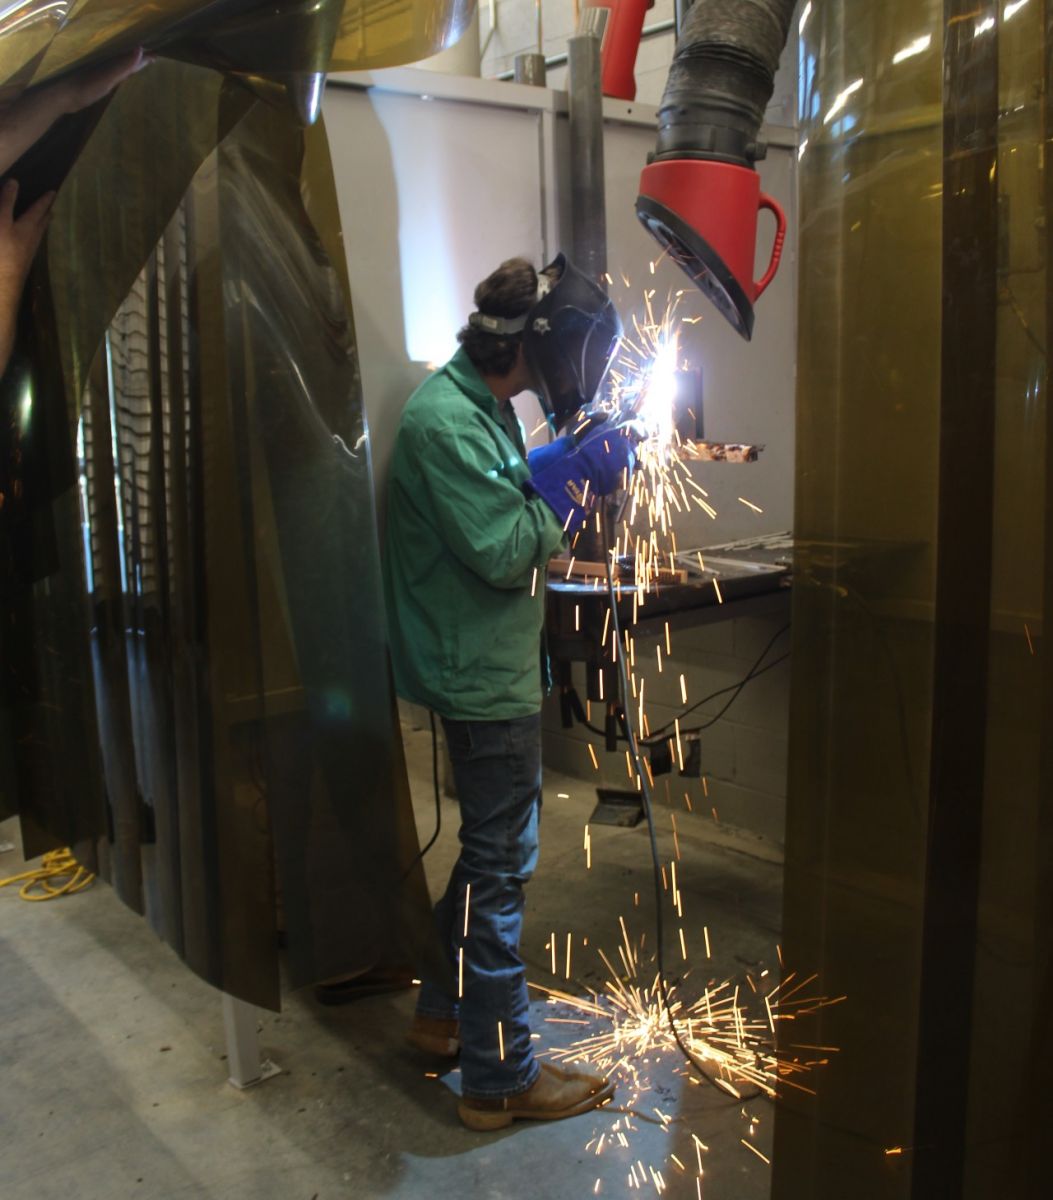 More than 40 high school students from 11 schools around the state took part in MTC's first-ever South Carolina High School Welding Skills Competition on Feb. 25. (Photo/Christina Lee Knauss)